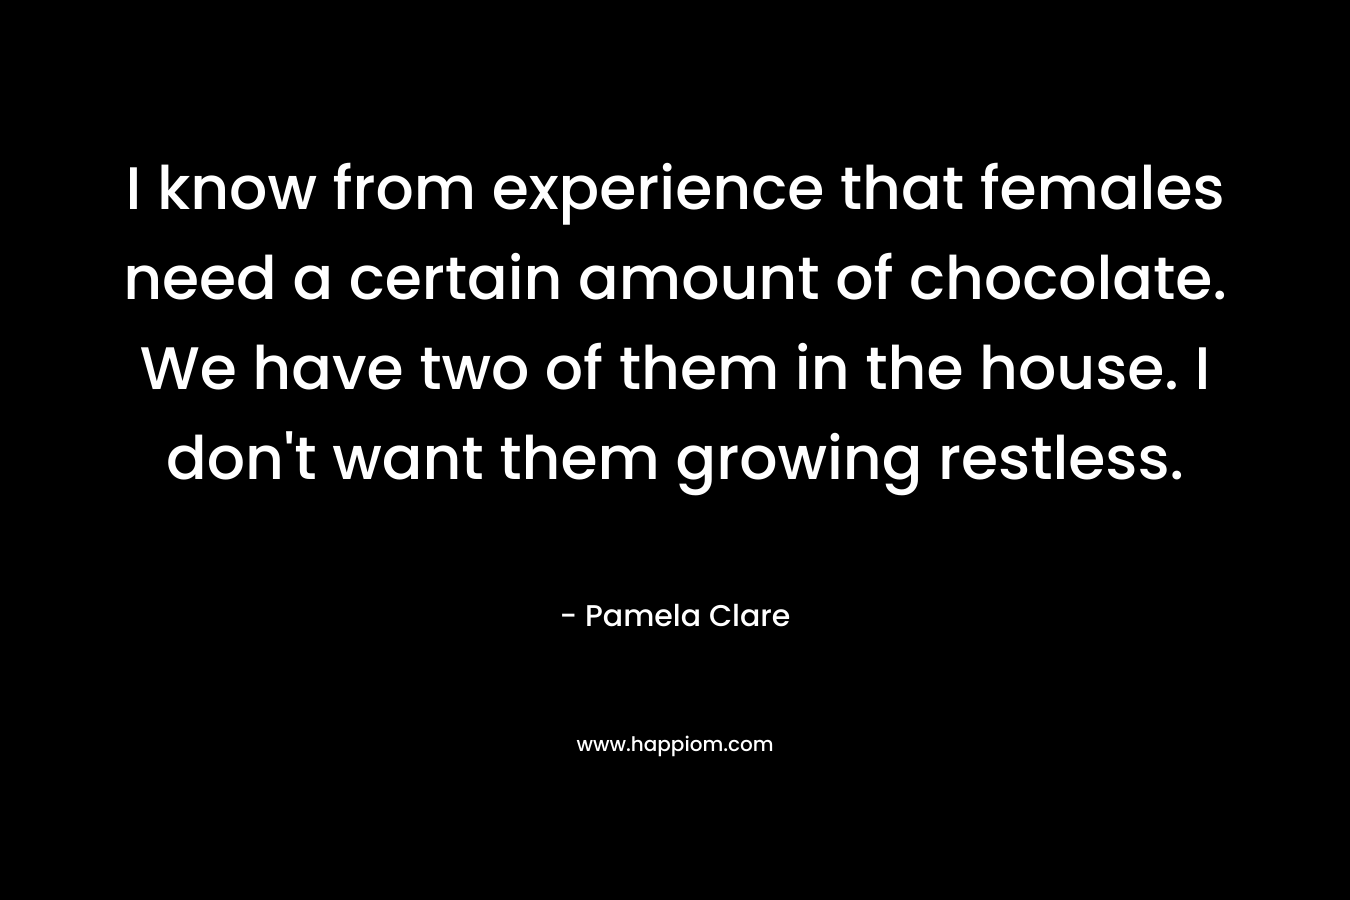 I know from experience that females need a certain amount of chocolate. We have two of them in the house. I don’t want them growing restless. – Pamela Clare